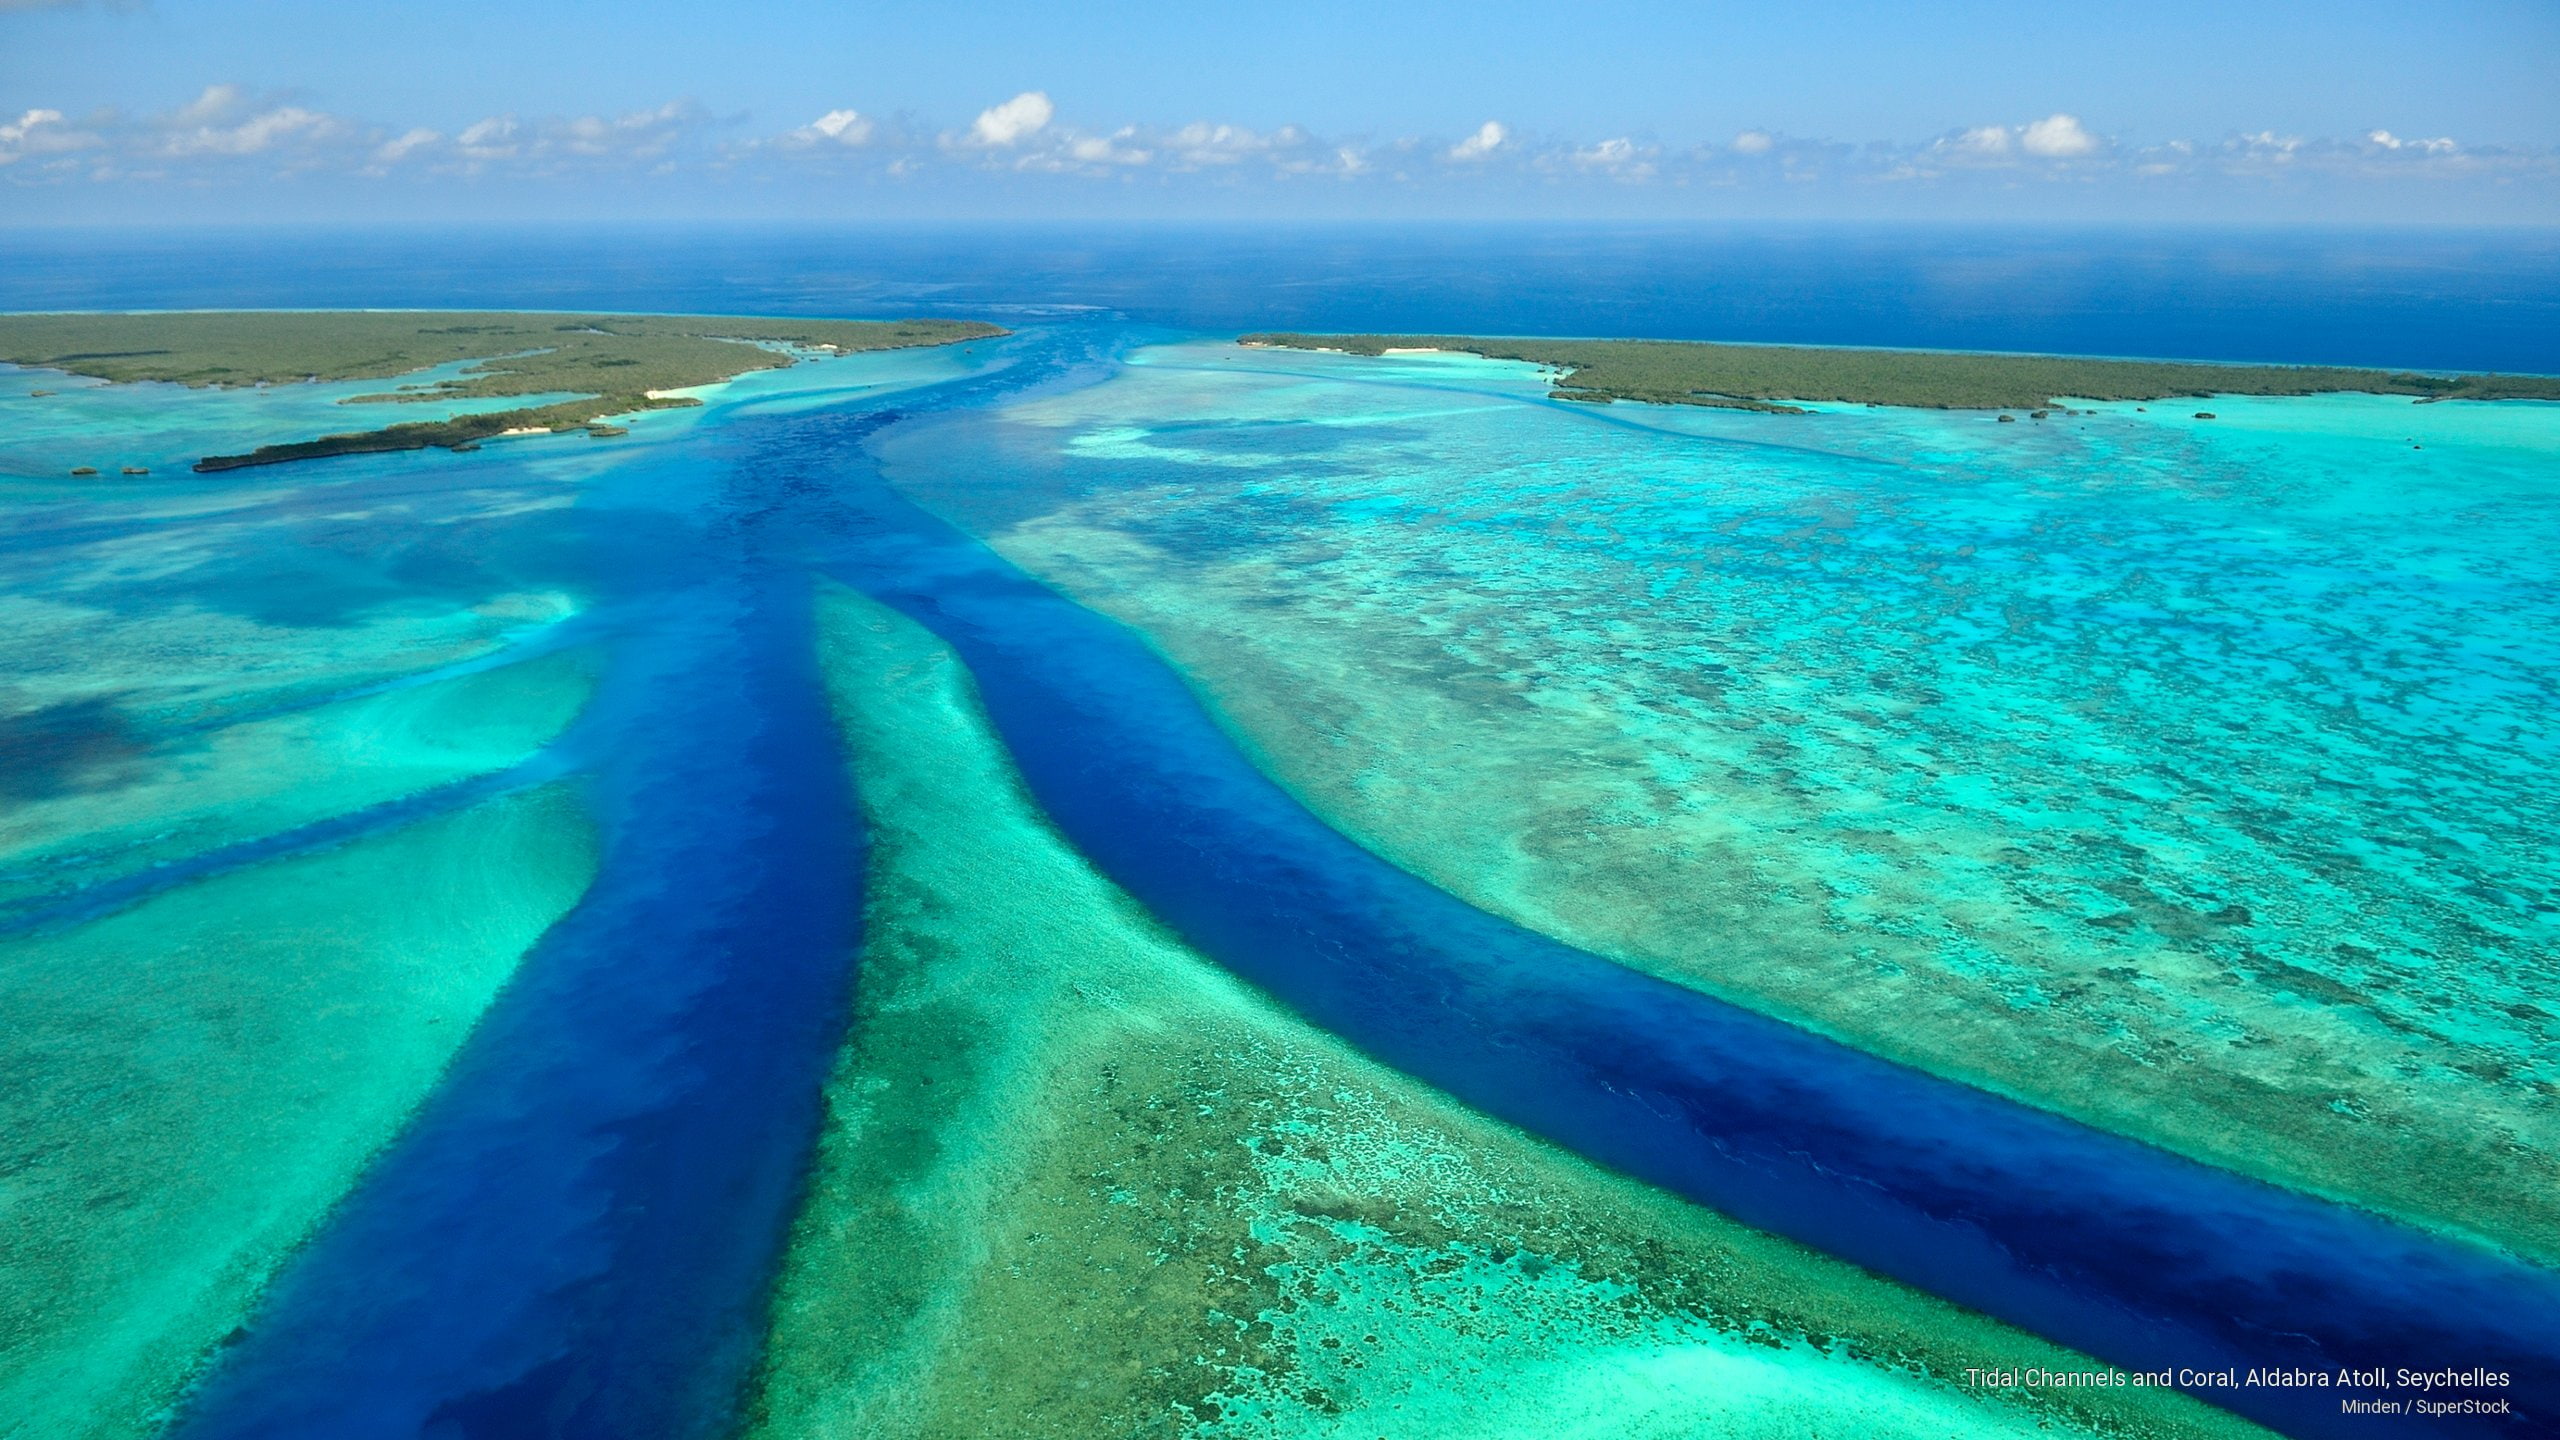 Tidal Channels and Coral, Aldabra Atoll, Seychelles, Islands